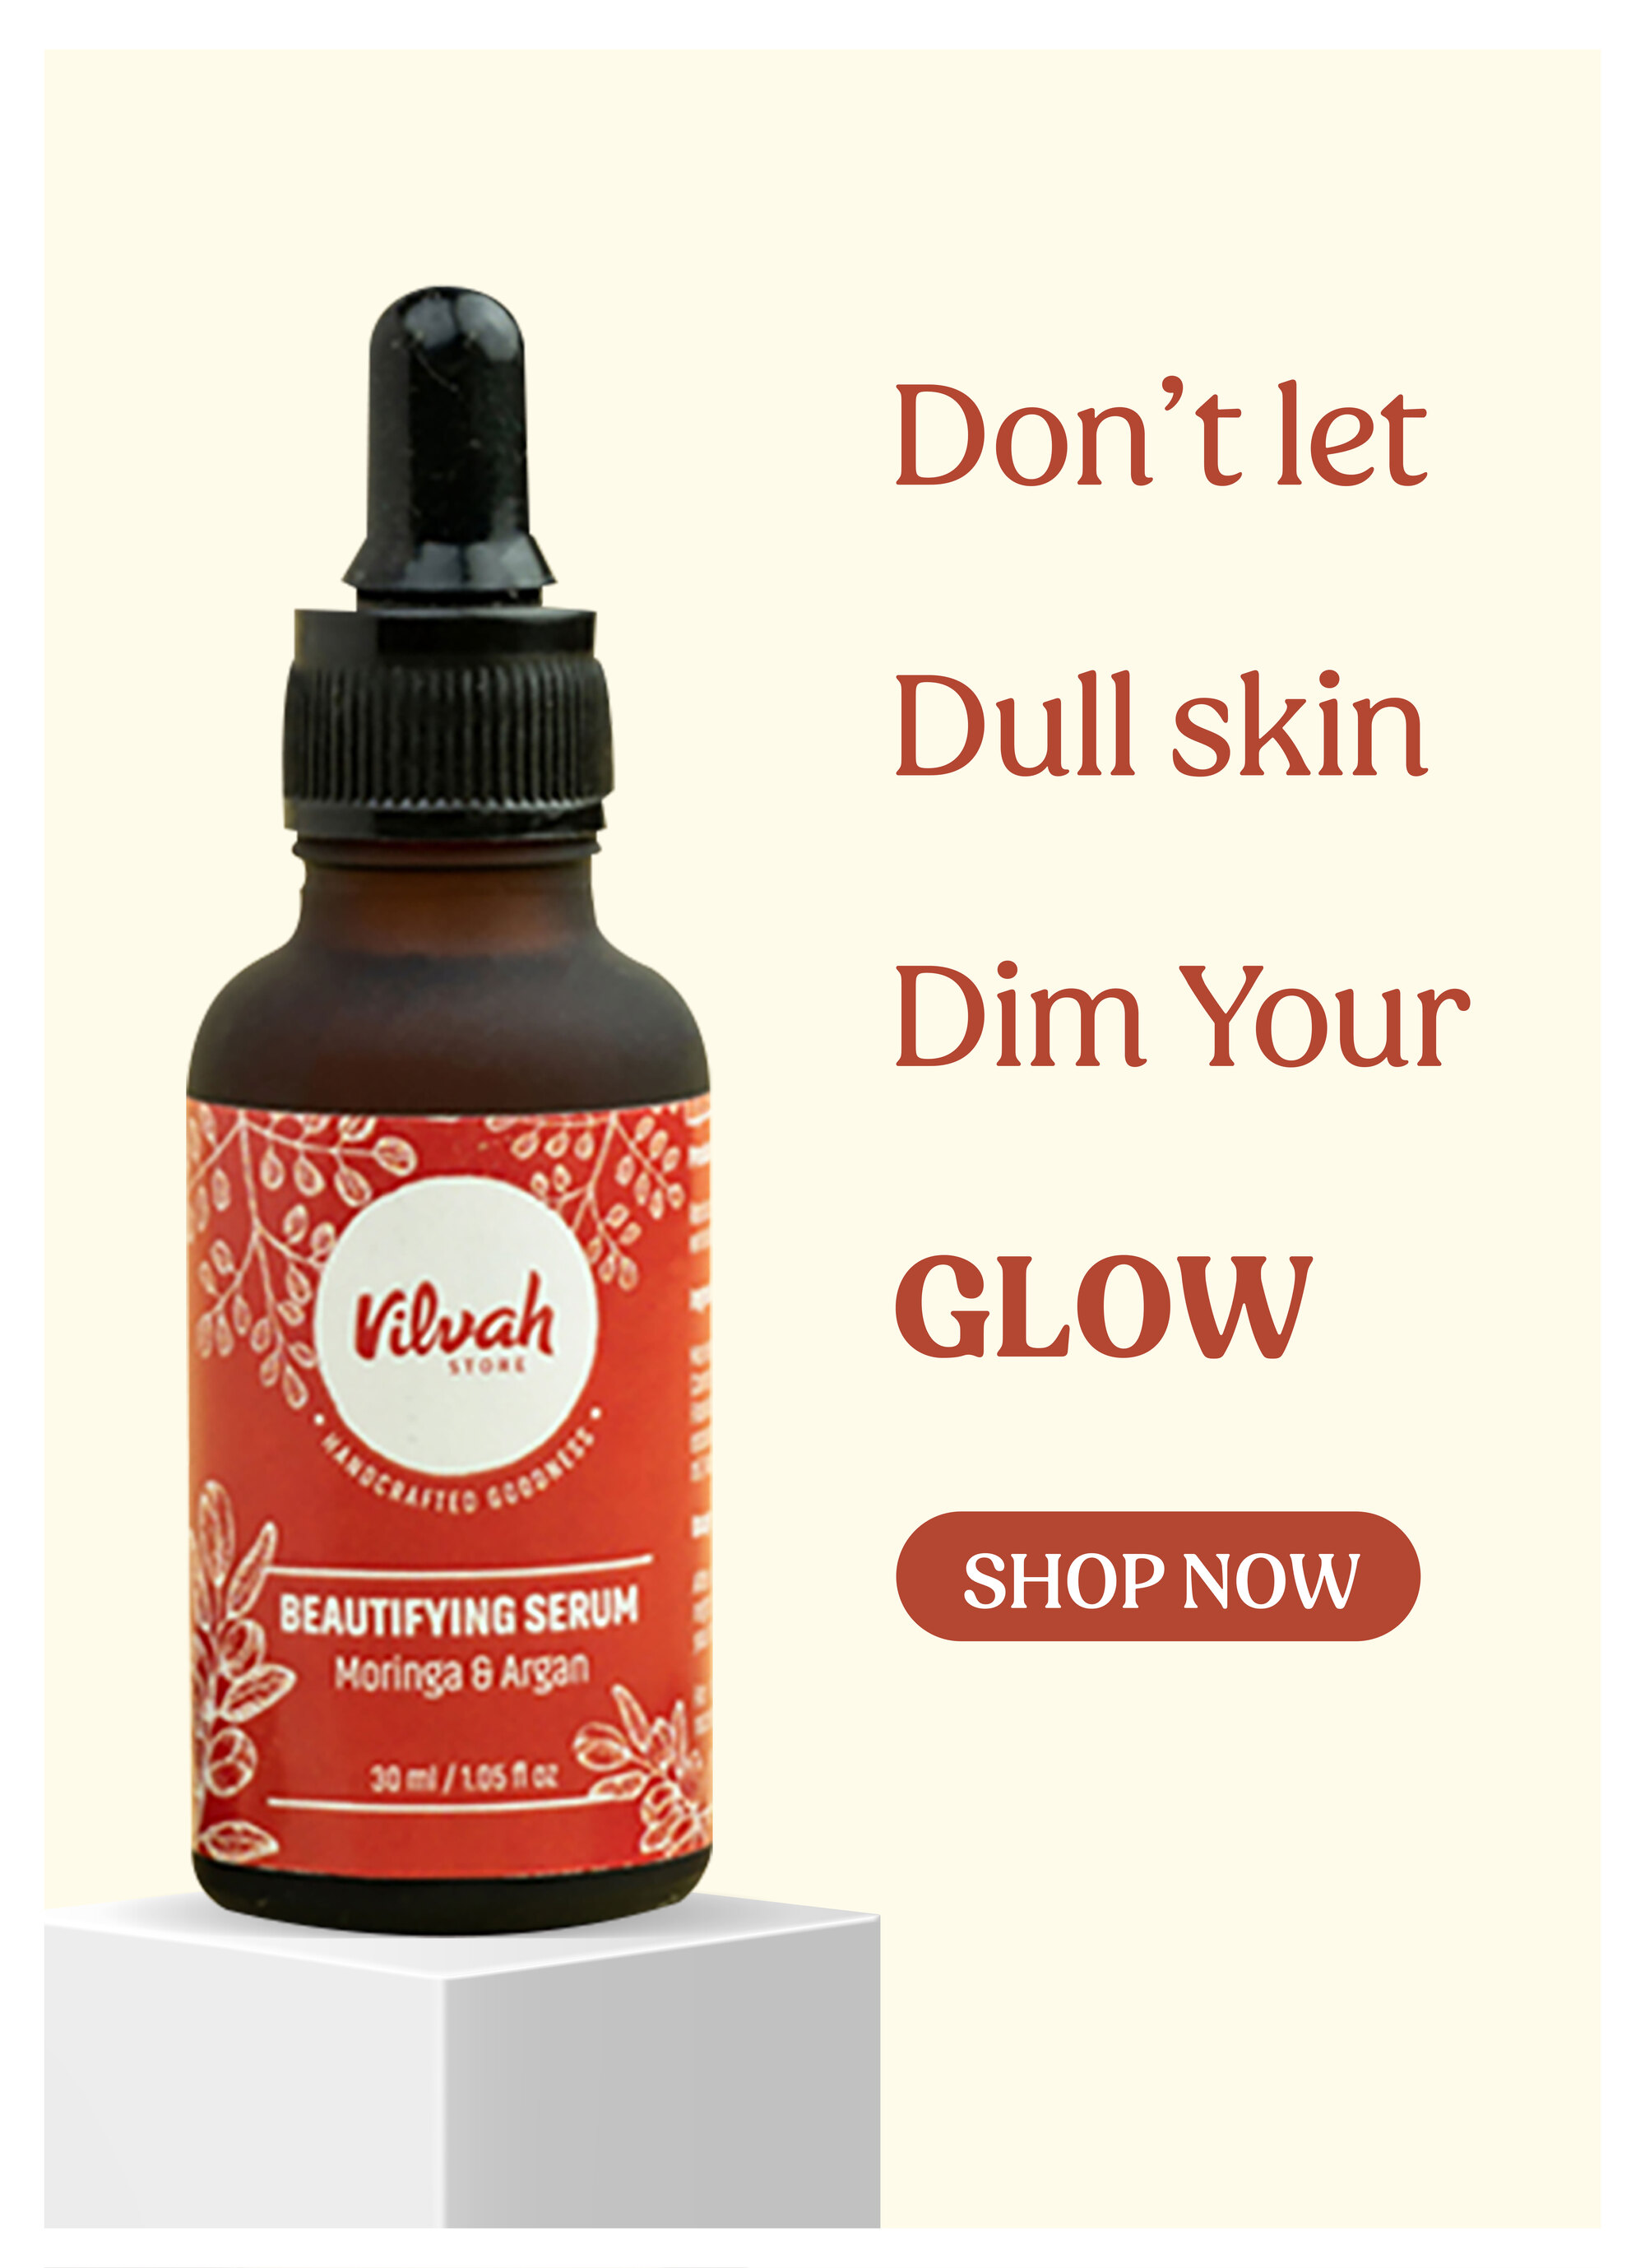 Don't let Dull skin Dim Your y GLOW rm SERUM iD Dy KO 30 mnt 105 fee 